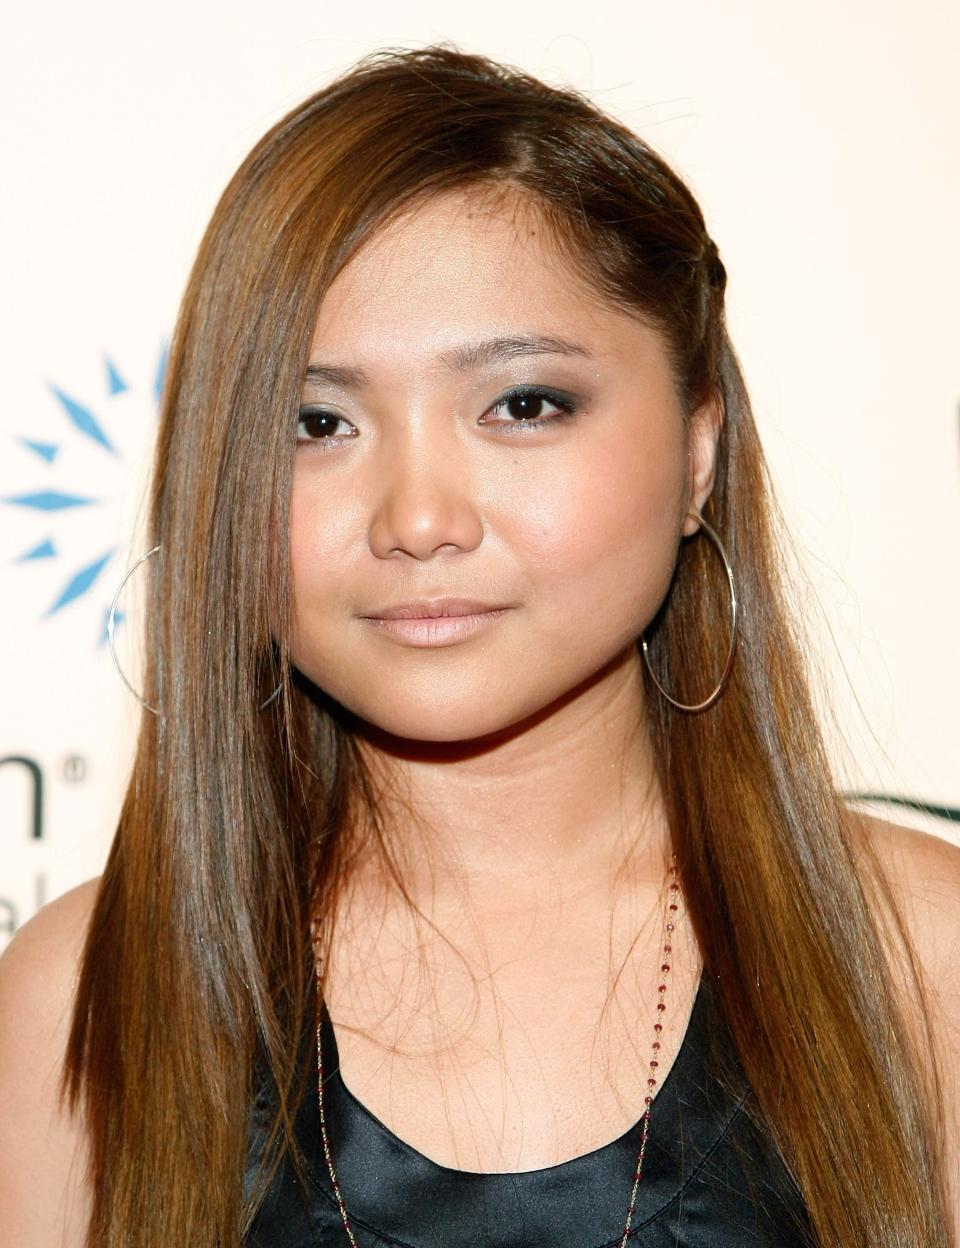 Charice arrives at the 14th annual Andre Agassi Charitable Foundation's Grand Slam for Children benefit concert at the Wynn Las Vegas September 26, 2009 in Las Vegas, Nevada. The event raises funds for the Andre Agassi Foundation for Education, which helps improve education for underprivileged youth in the Las Vegas community. (Photo by Ethan Miller/Getty Images)